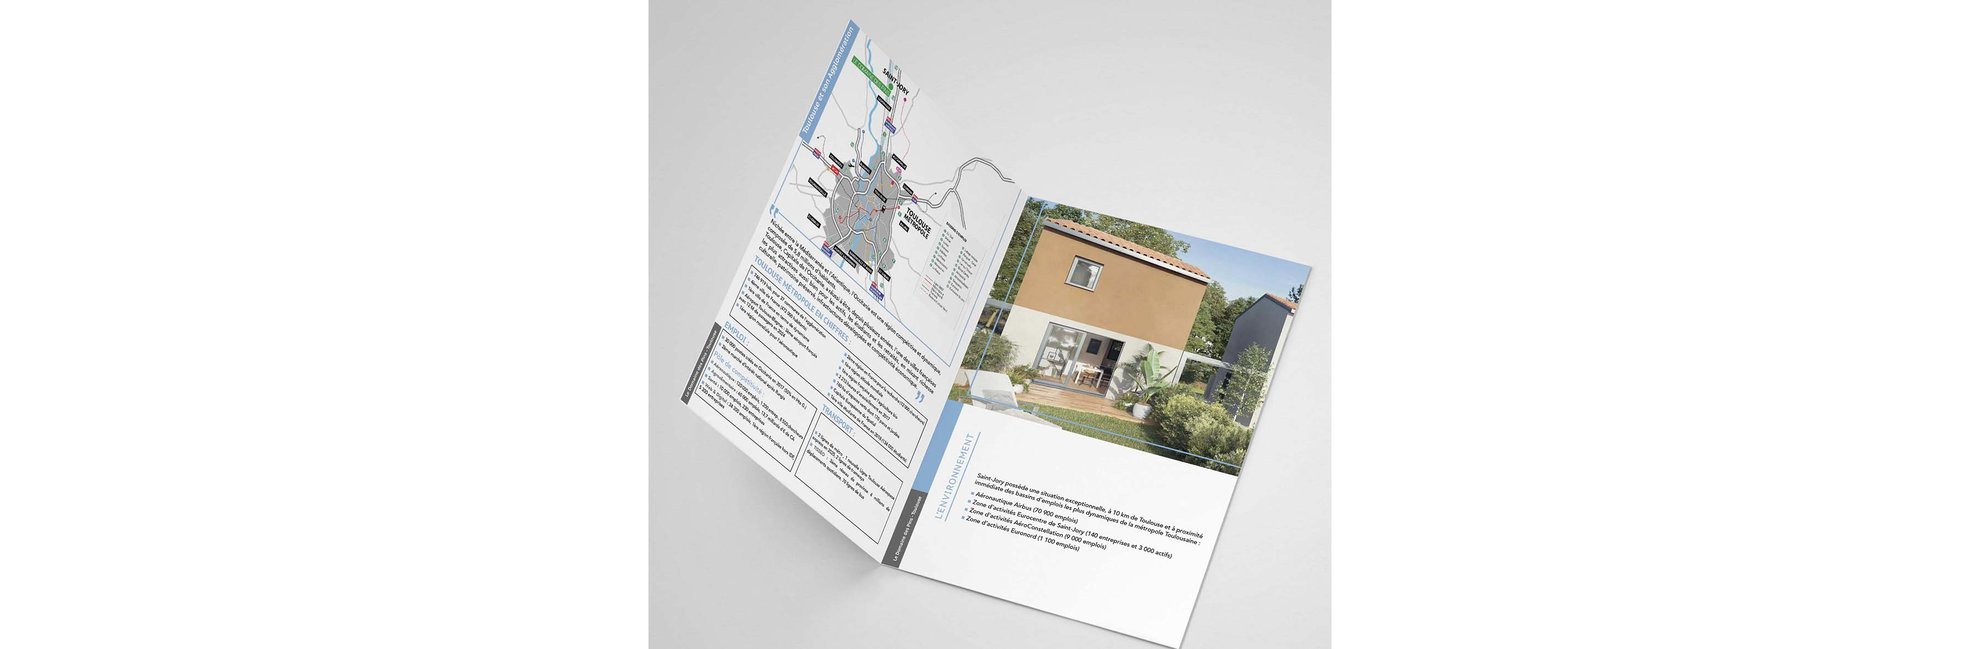 Refonte brochure 1 Commercial projet immobilier